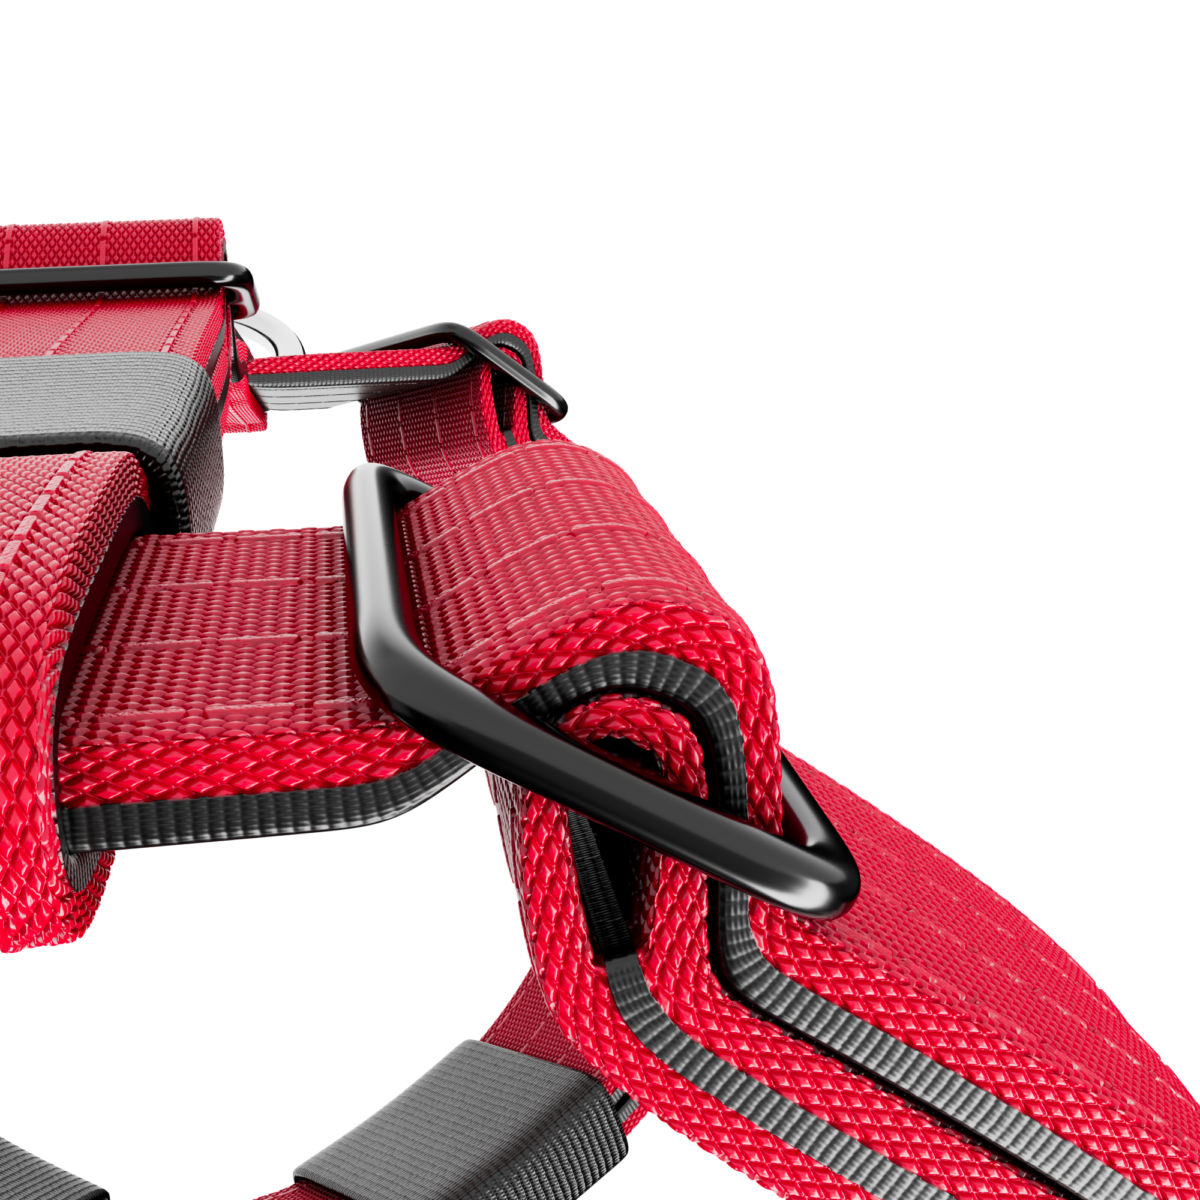 BULLYBILLOWS TRI-Harness - Anti-Pull, Adjustable & Durable - Dog Trainers Choice - Red v2.0